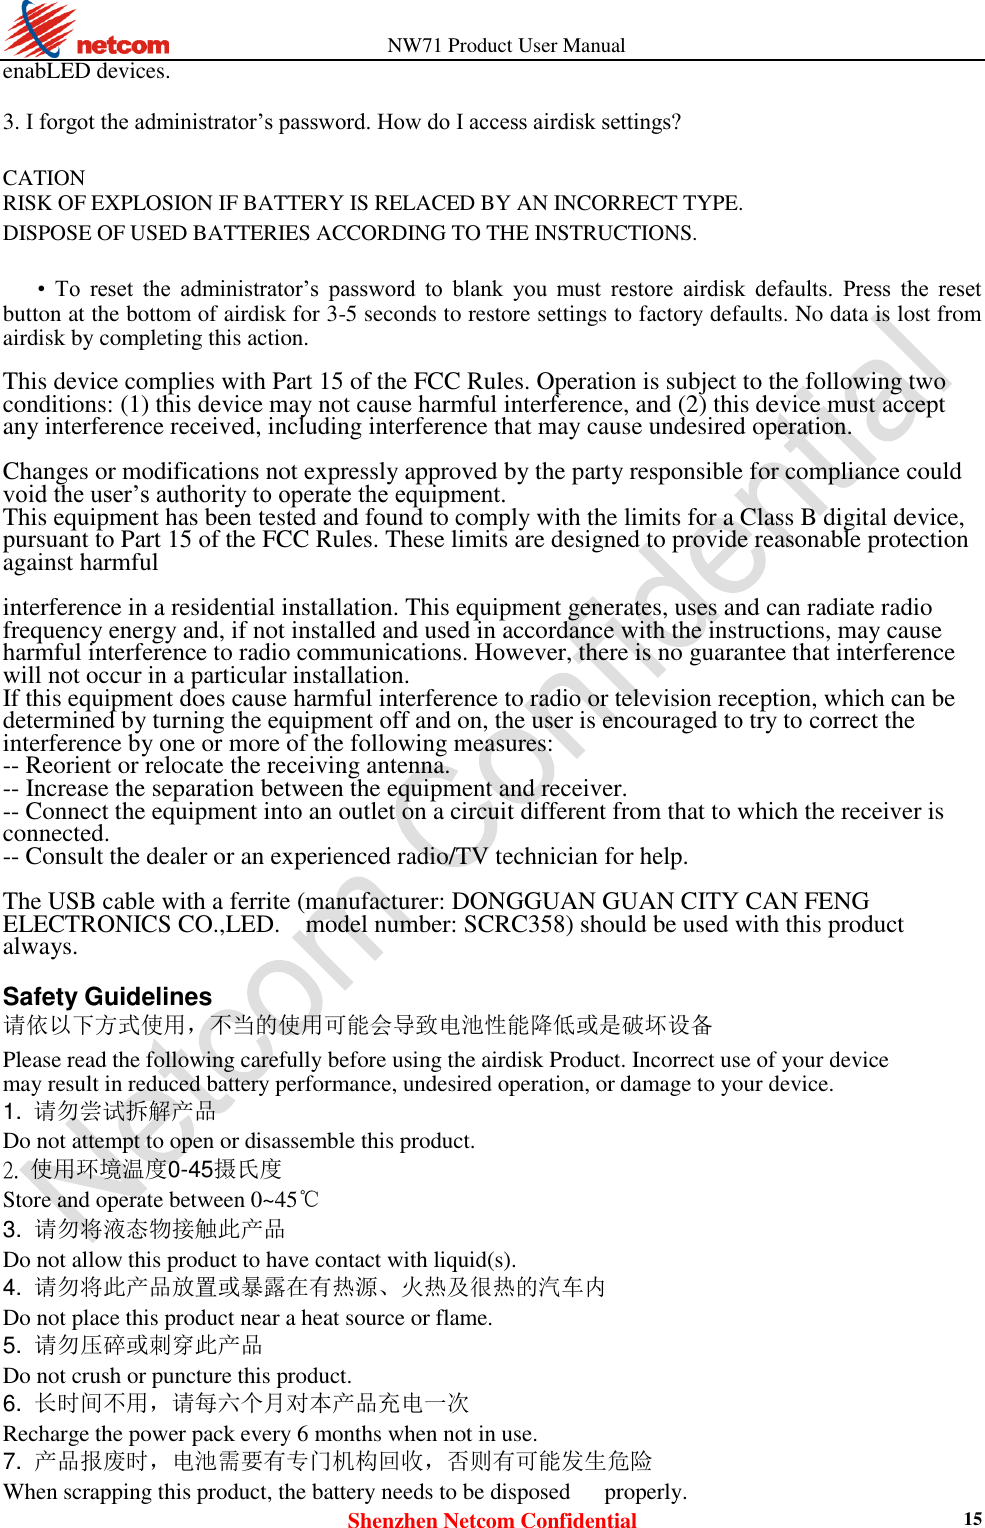                   NW71 Product User Manual Shenzhen Netcom Confidential 15 enabLED devices.    3. I forgot the administrator’s password. How do I access airdisk settings?    CATION   RISK OF EXPLOSION IF BATTERY IS RELACED BY AN INCORRECT TYPE.   DISPOSE OF USED BATTERIES ACCORDING TO THE INSTRUCTIONS.  • To  reset  the  administrator’s  password  to  blank  you  must  restore  airdisk  defaults.  Press  the  reset button at the bottom of airdisk for 3-5 seconds to restore settings to factory defaults. No data is lost from airdisk by completing this action.    This device complies with Part 15 of the FCC Rules. Operation is subject to the following two conditions: (1) this device may not cause harmful interference, and (2) this device must accept any interference received, including interference that may cause undesired operation.  Changes or modifications not expressly approved by the party responsible for compliance could void the user’s authority to operate the equipment. This equipment has been tested and found to comply with the limits for a Class B digital device, pursuant to Part 15 of the FCC Rules. These limits are designed to provide reasonable protection against harmful  interference in a residential installation. This equipment generates, uses and can radiate radio frequency energy and, if not installed and used in accordance with the instructions, may cause harmful interference to radio communications. However, there is no guarantee that interference will not occur in a particular installation. If this equipment does cause harmful interference to radio or television reception, which can be determined by turning the equipment off and on, the user is encouraged to try to correct the interference by one or more of the following measures: -- Reorient or relocate the receiving antenna. -- Increase the separation between the equipment and receiver. -- Connect the equipment into an outlet on a circuit different from that to which the receiver is connected. -- Consult the dealer or an experienced radio/TV technician for help.  The USB cable with a ferrite (manufacturer: DONGGUAN GUAN CITY CAN FENG ELECTRONICS CO.,LED.    model number: SCRC358) should be used with this product always.  Safety Guidelines  请依以下方式使用，不当的使用可能会导致电池性能降低或是破坏设备  Please read the following carefully before using the airdisk Product. Incorrect use of your device may result in reduced battery performance, undesired operation, or damage to your device. 1.  请勿尝试拆解产品  Do not attempt to open or disassemble this product.  2. 使用环境温度0-45摄氏度   Store and operate between 0~45℃   3. 请勿将液态物接触此产品    Do not allow this product to have contact with liquid(s). 4. 请勿将此产品放置或暴露在有热源、火热及很热的汽车内    Do not place this product near a heat source or flame.   5. 请勿压碎或刺穿此产品    Do not crush or puncture this product. 6. 长时间不用，请每六个月对本产品充电一次    Recharge the power pack every 6 months when not in use.   7. 产品报废时，电池需要有专门机构回收，否则有可能发生危险    When scrapping this product, the battery needs to be disposed      properly. 